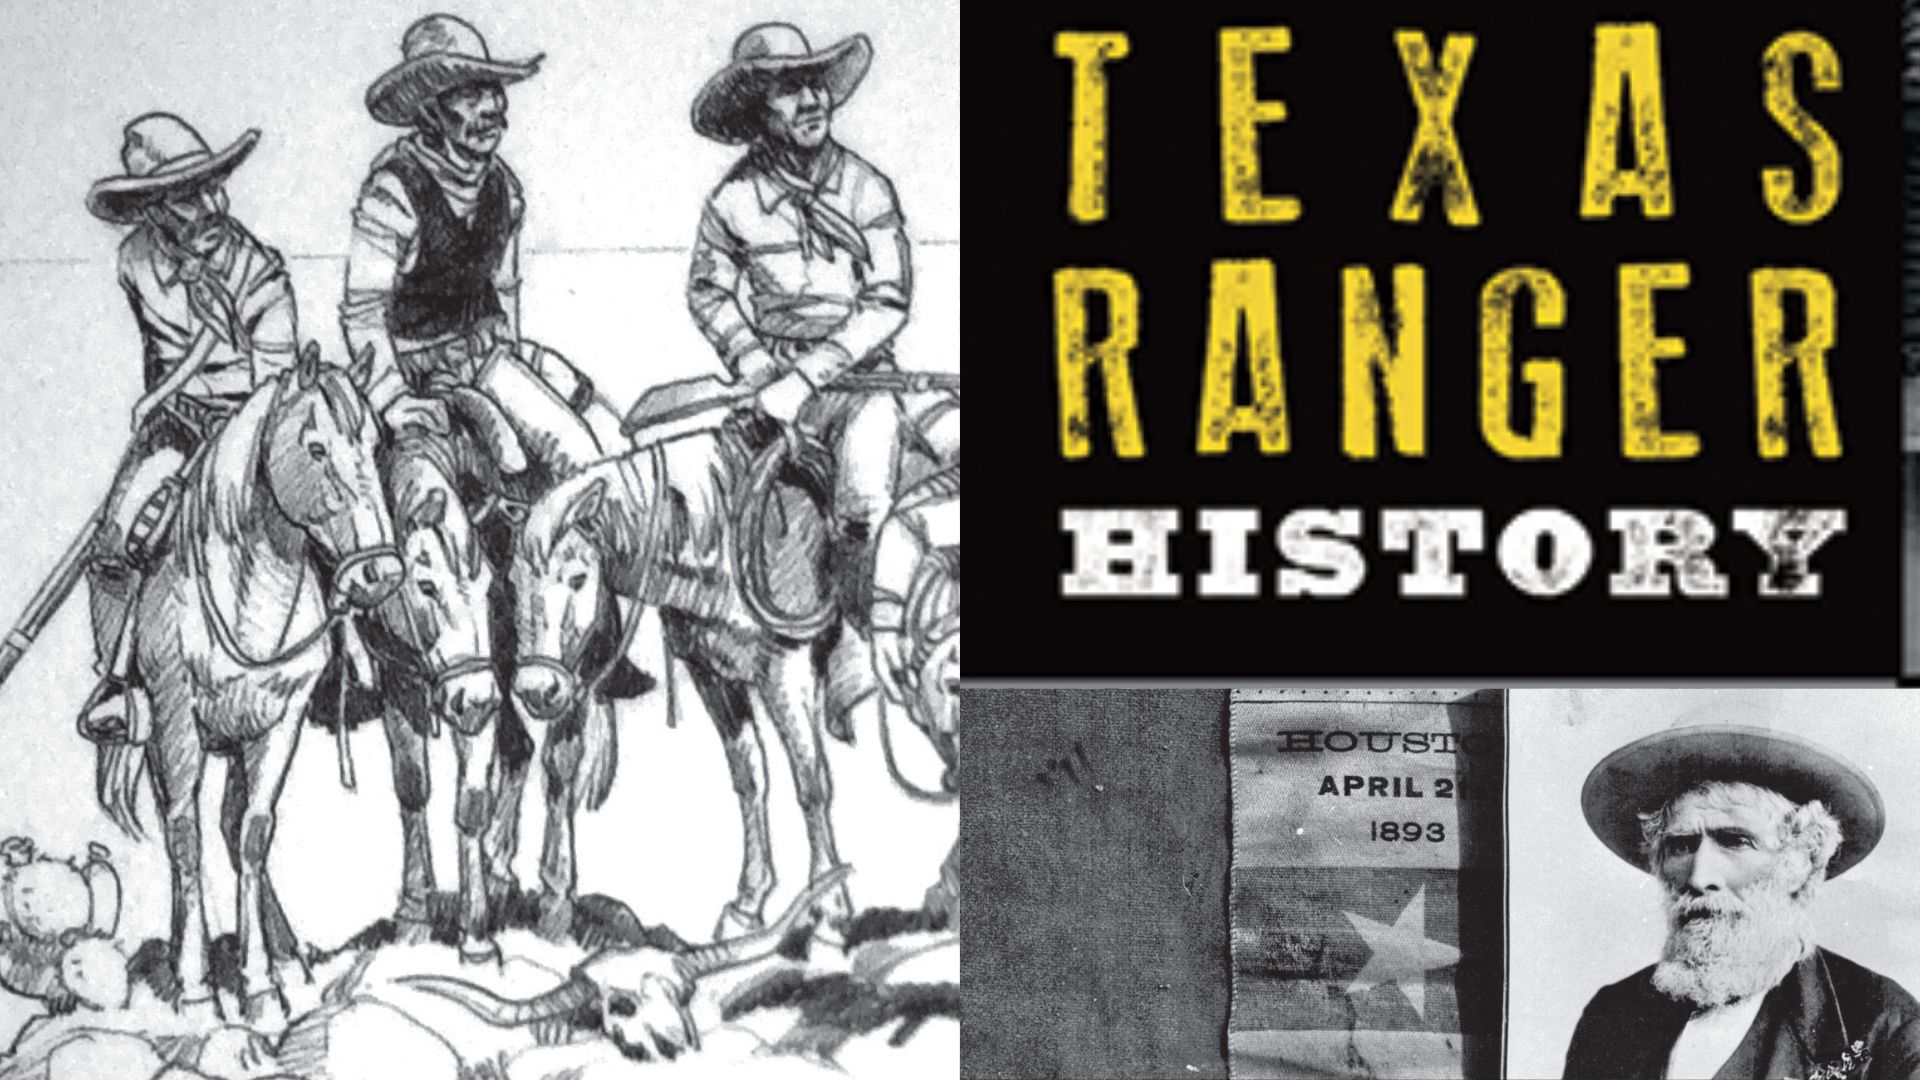 The Texas Rangers: A History of the Famous Law Enforcement Agency